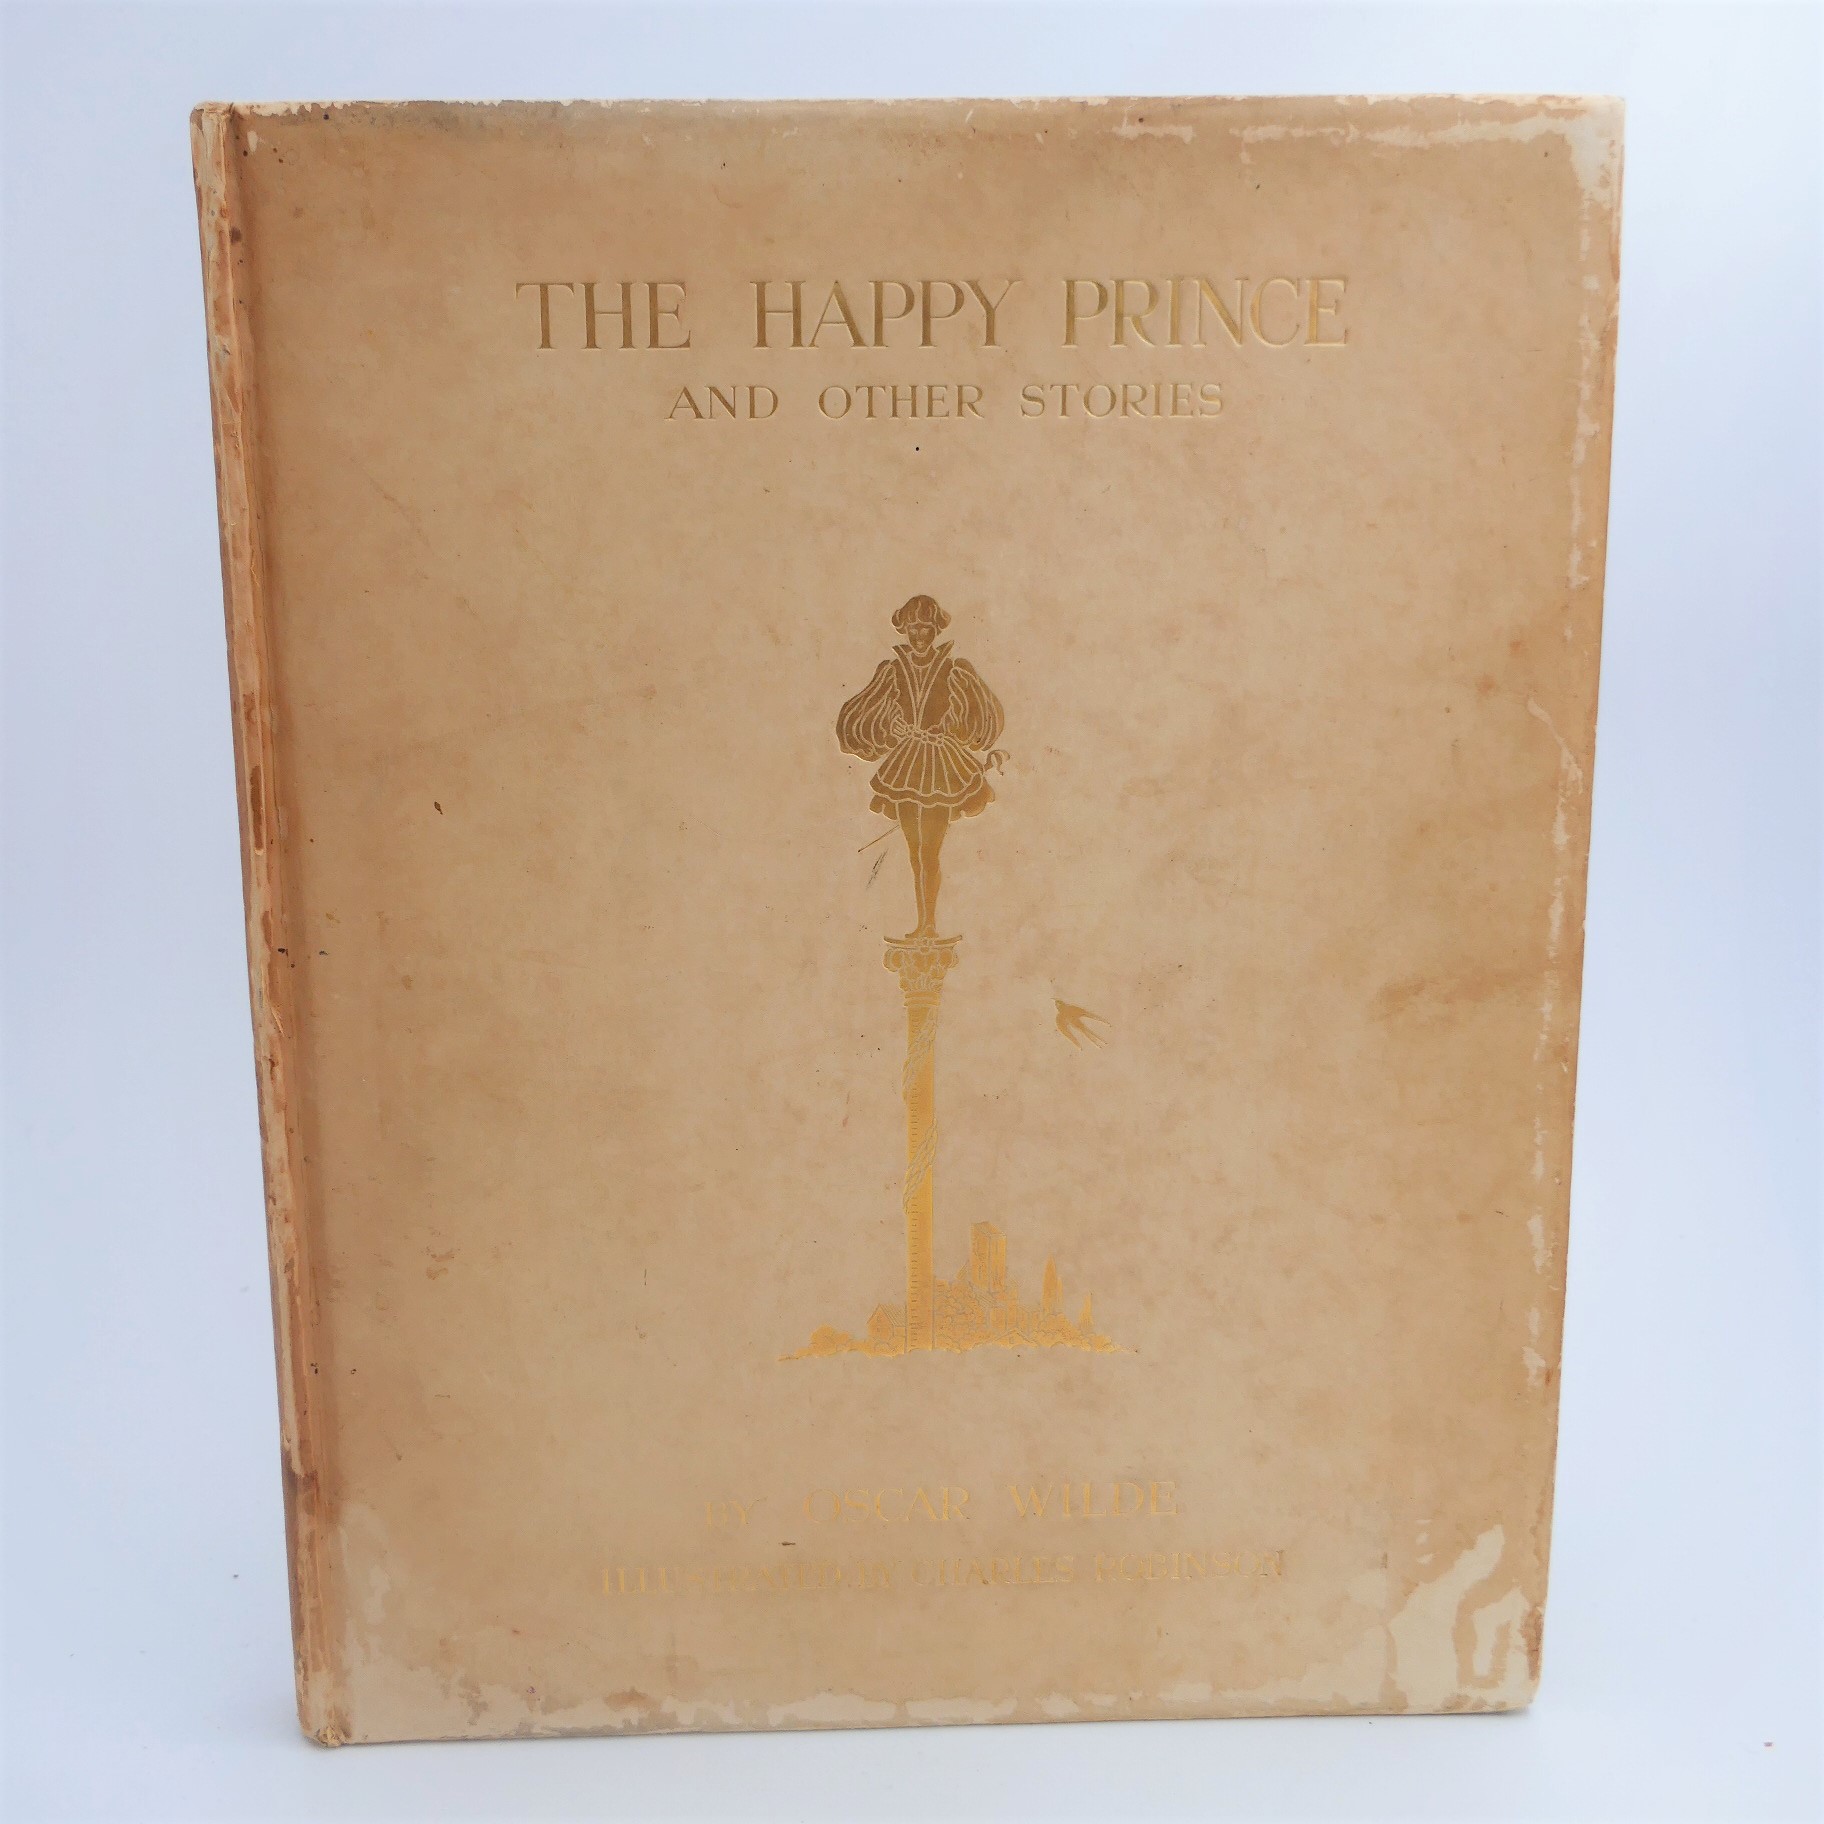 The Happy Prince And Other Stories. Limited Signed Edition (1913) by Oscar Wilde